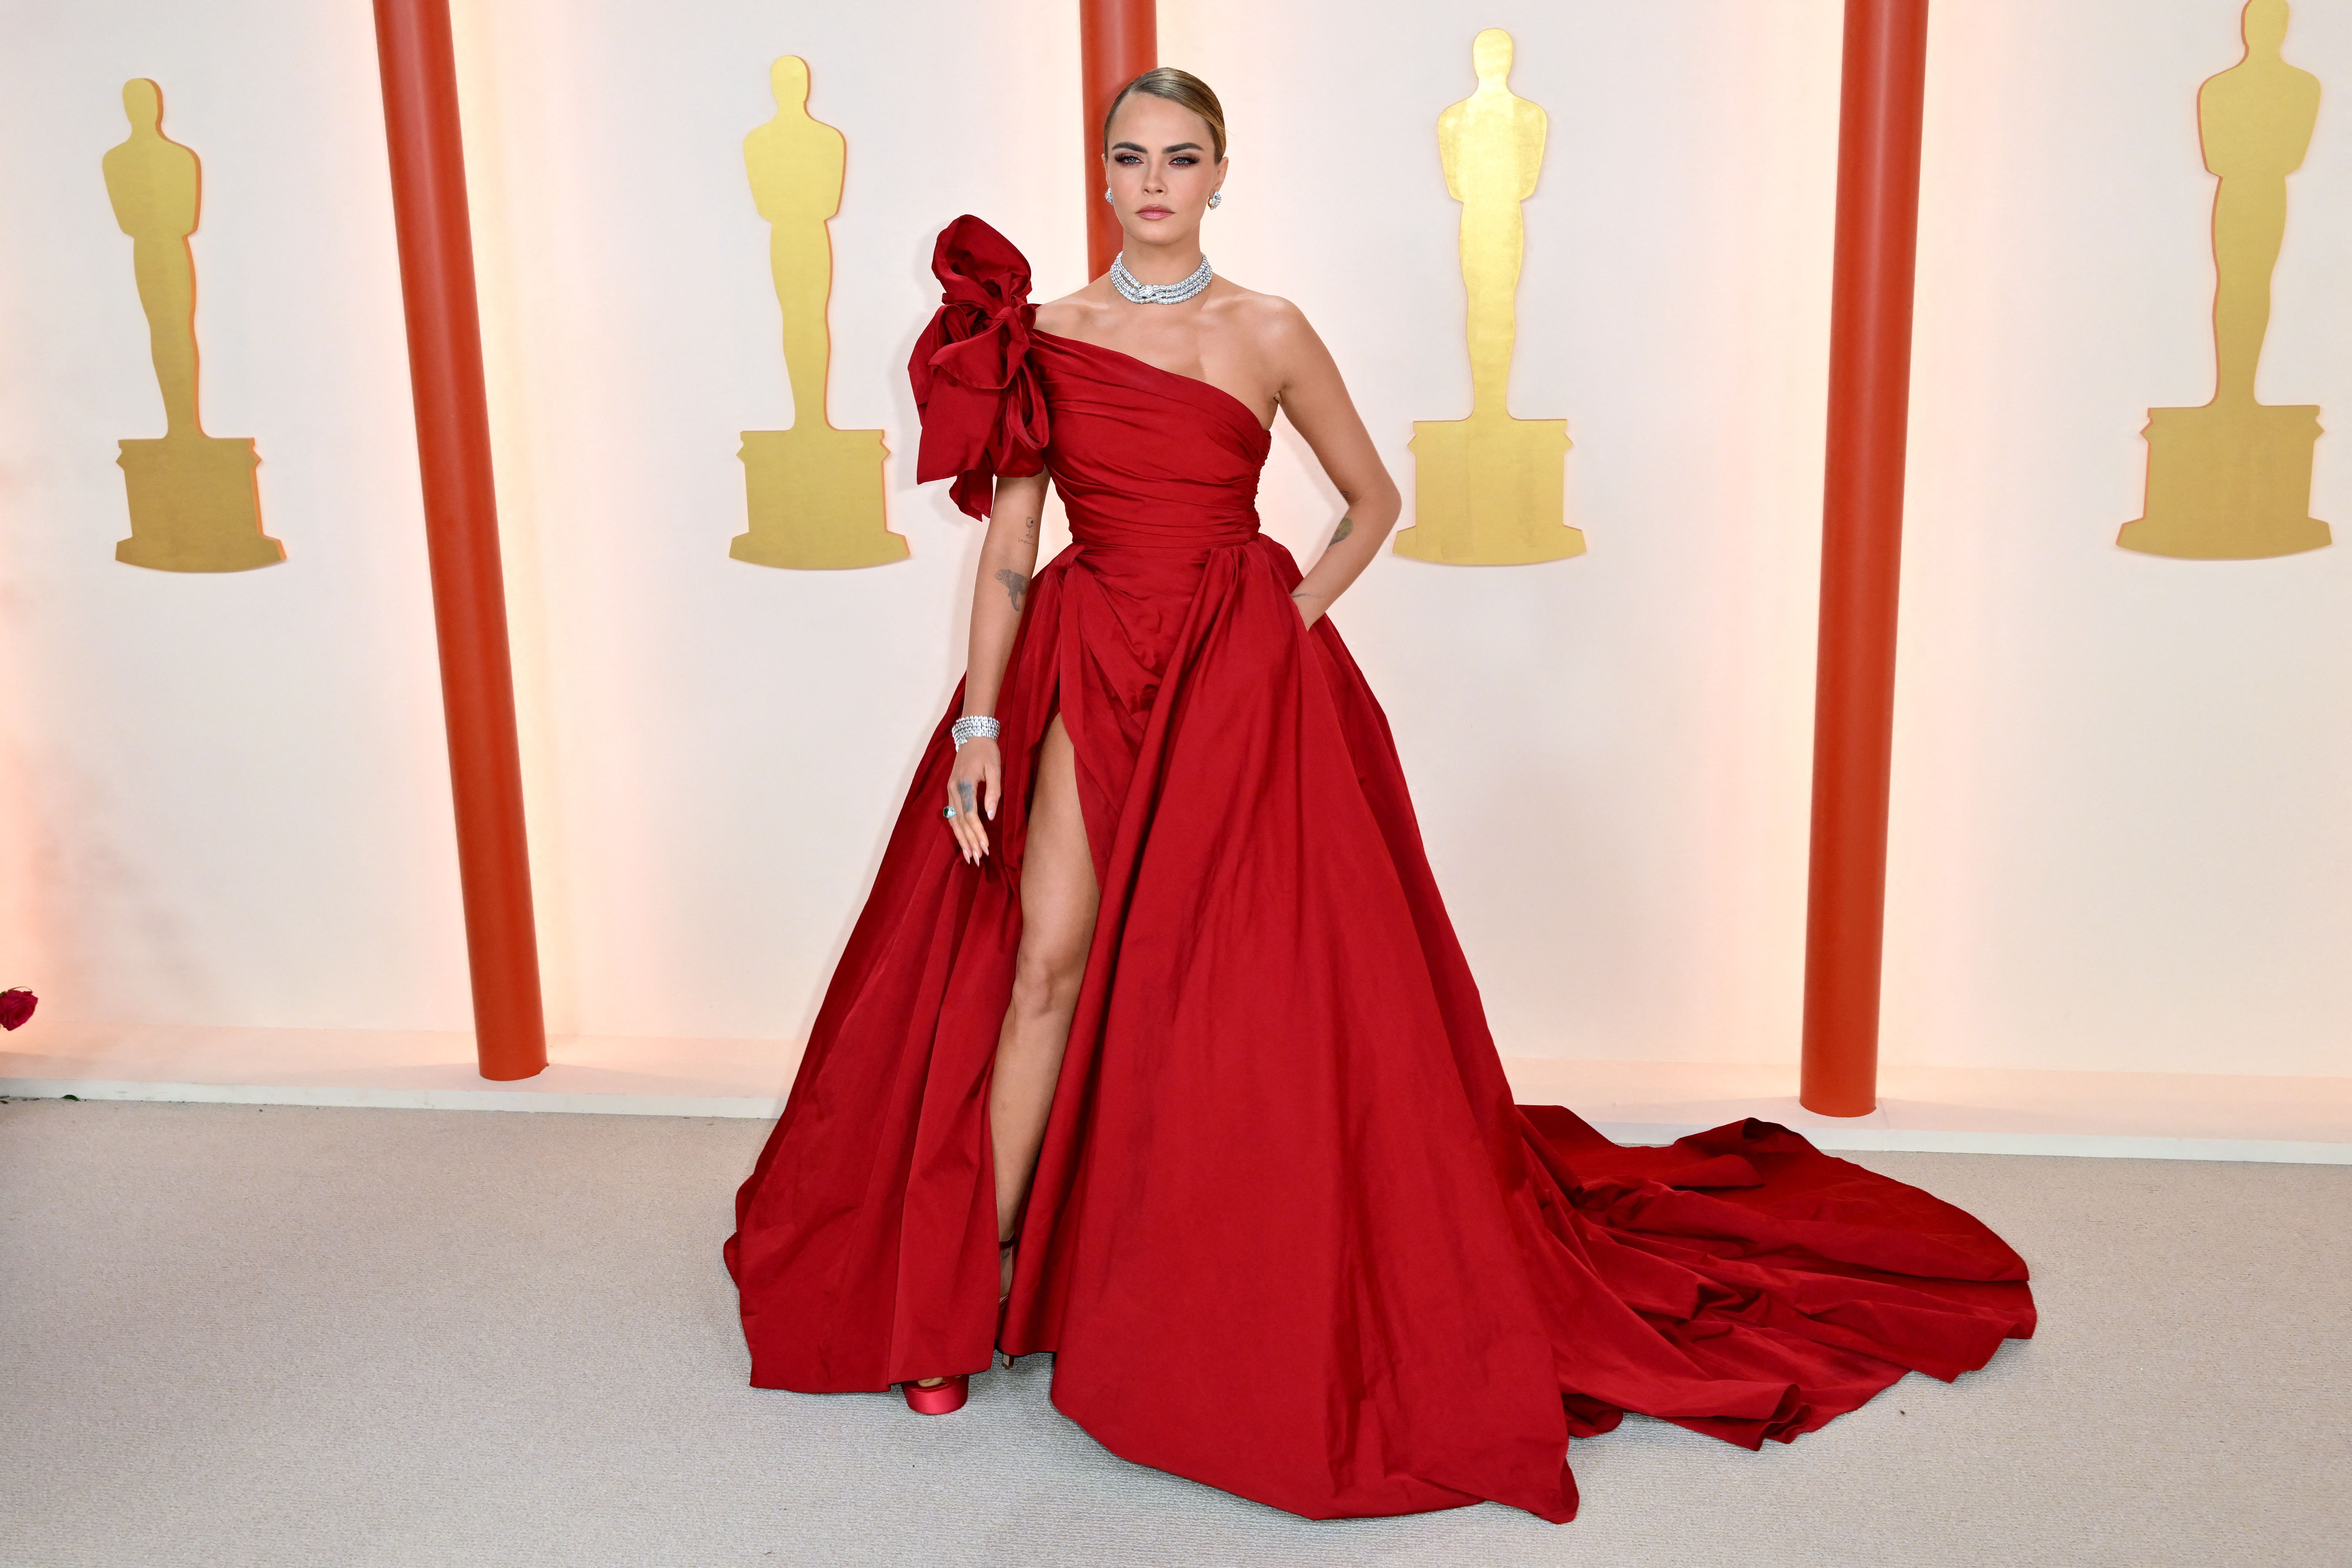 Cara Delevingne on the 95th Annual Oscars awards ceremony held at the Dolby Theatre in Hollywood, CA, on March 12, 2023. | Source: Getty Images